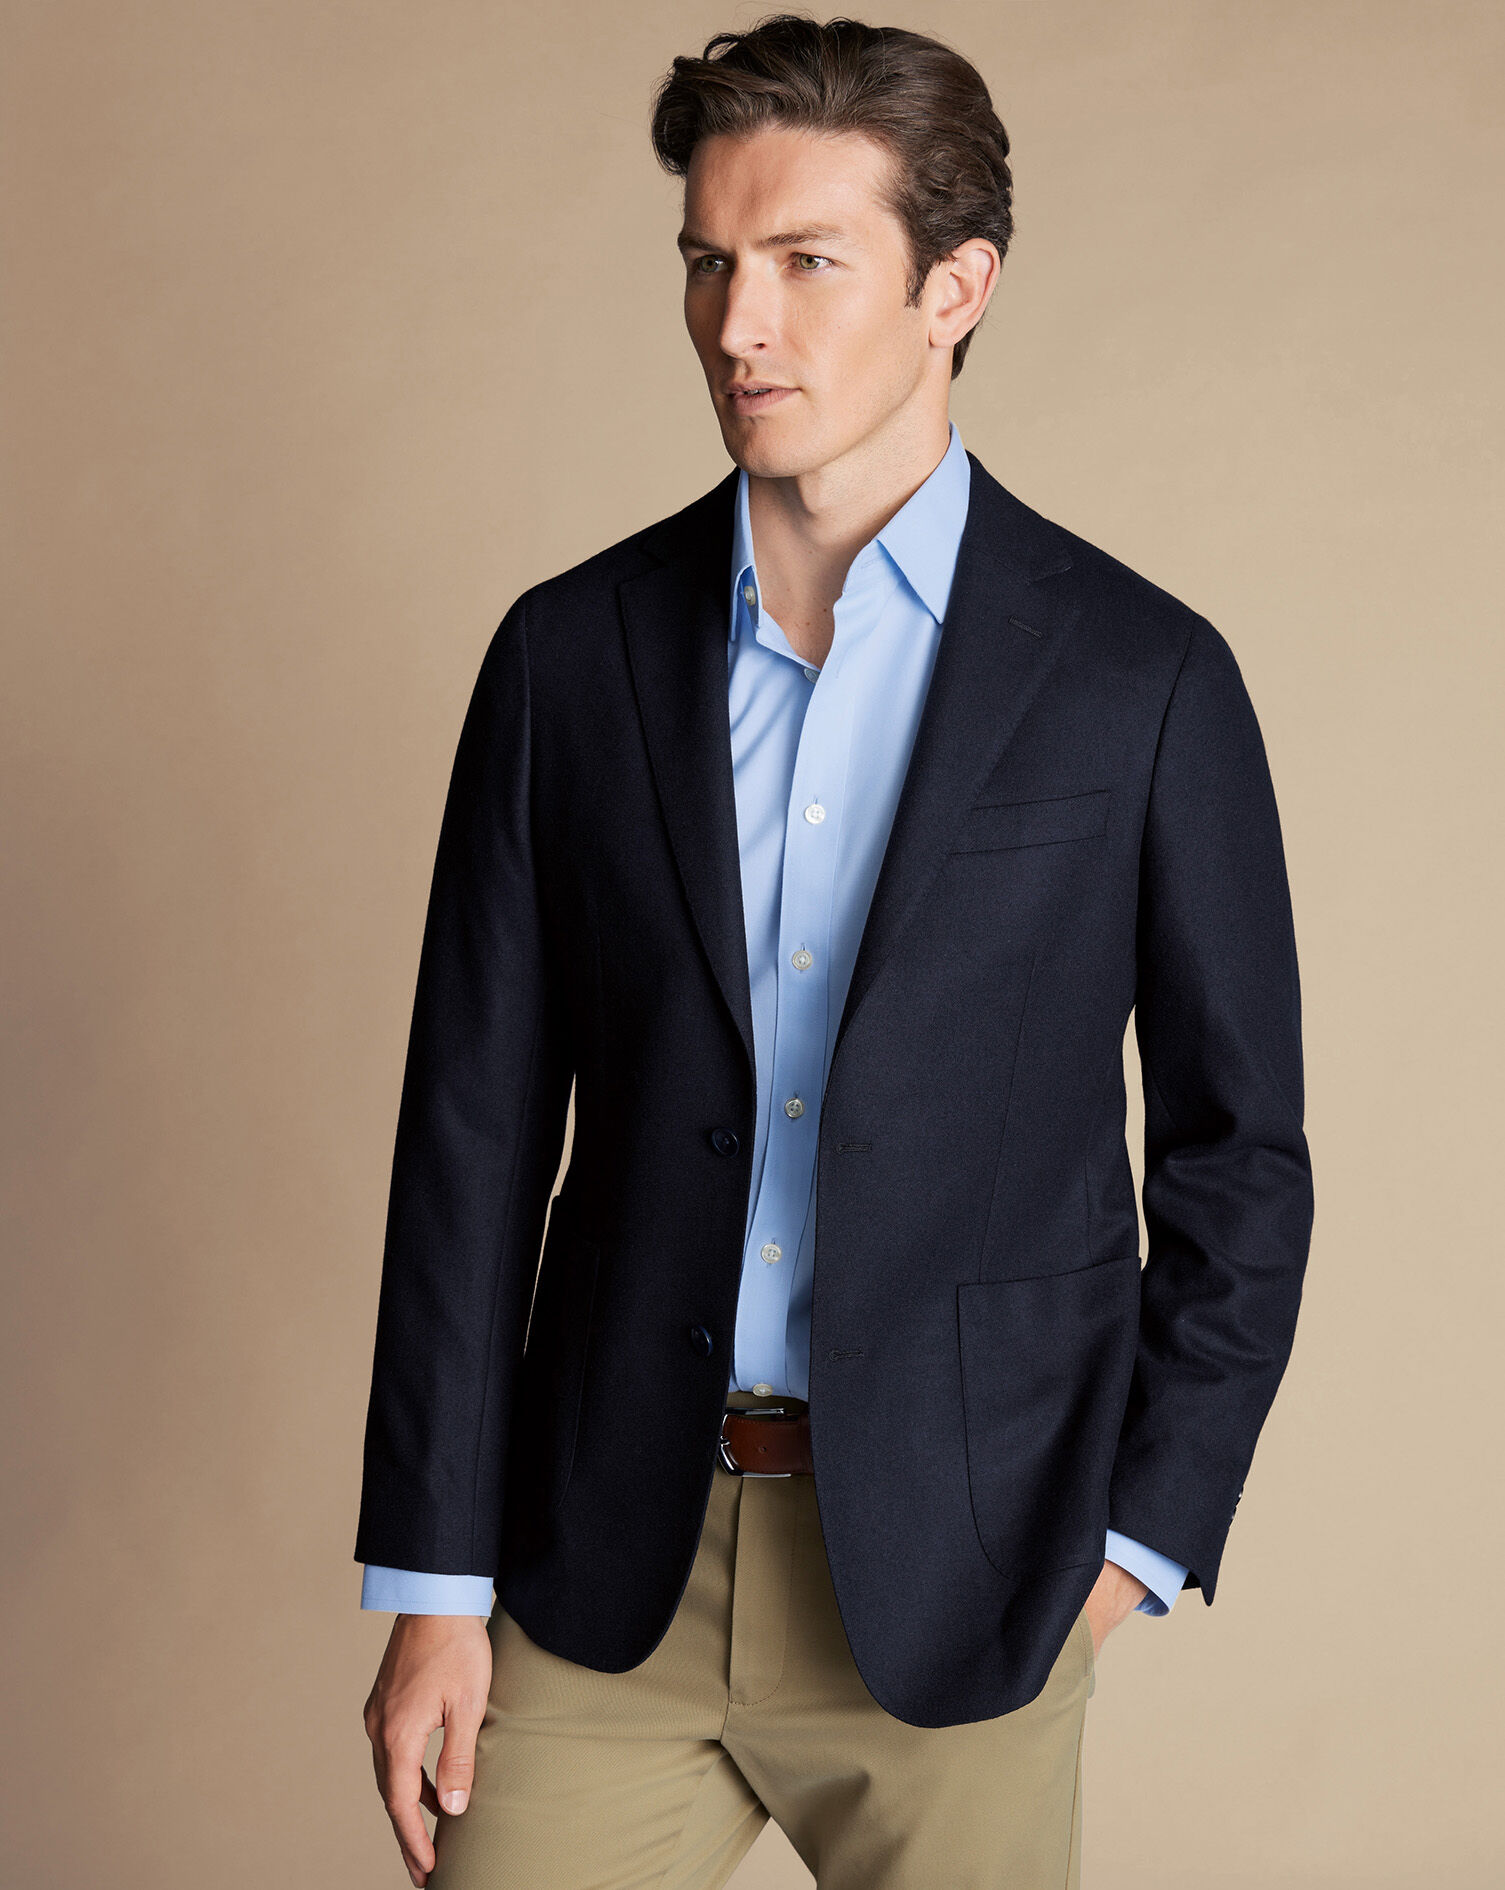 Style without stiffness - sports jackets are your summer staple